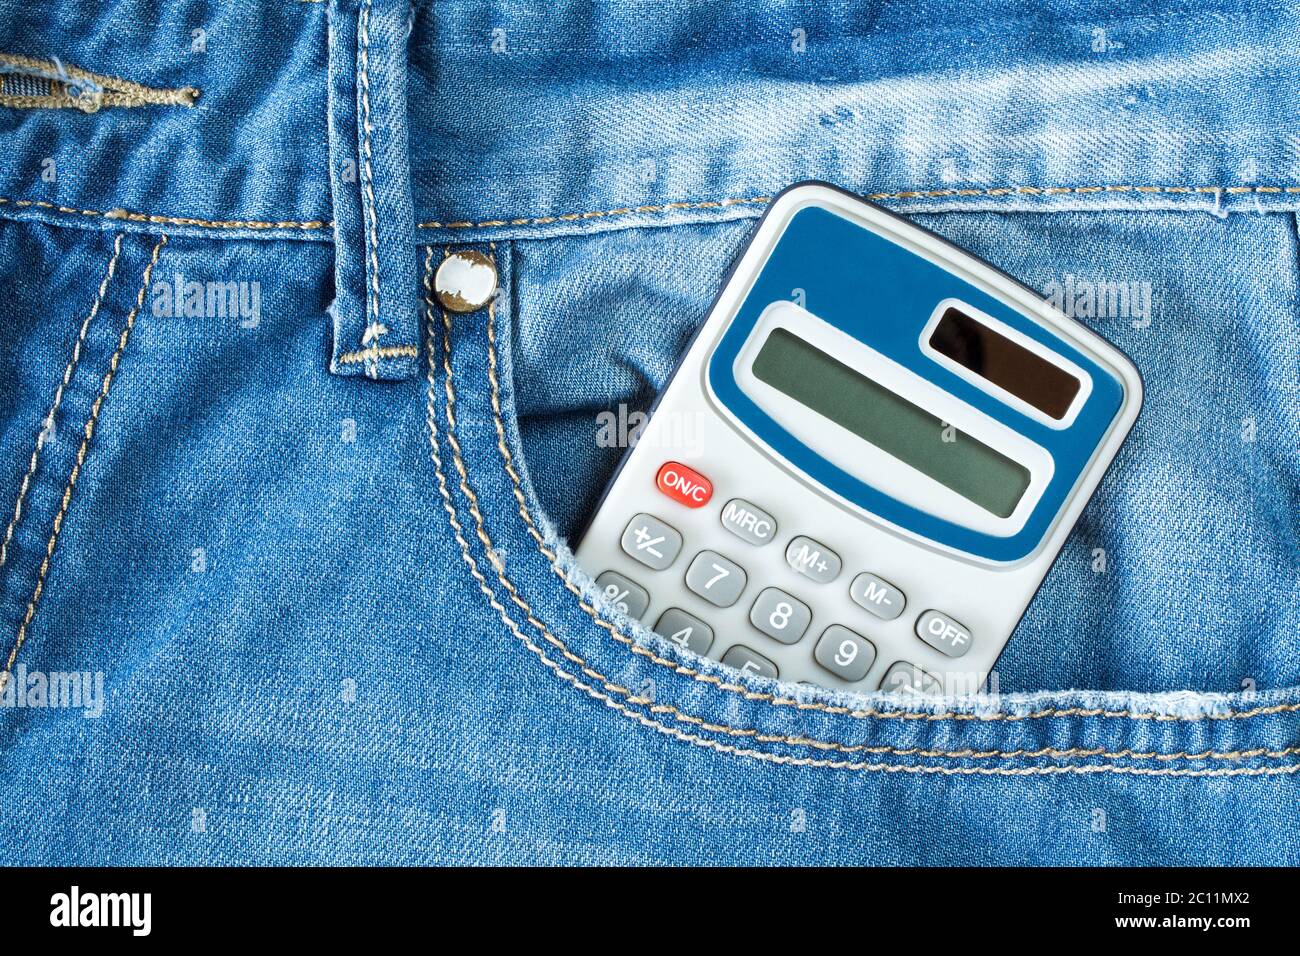 Calculator in jeans pocket Stock Photo - Alamy